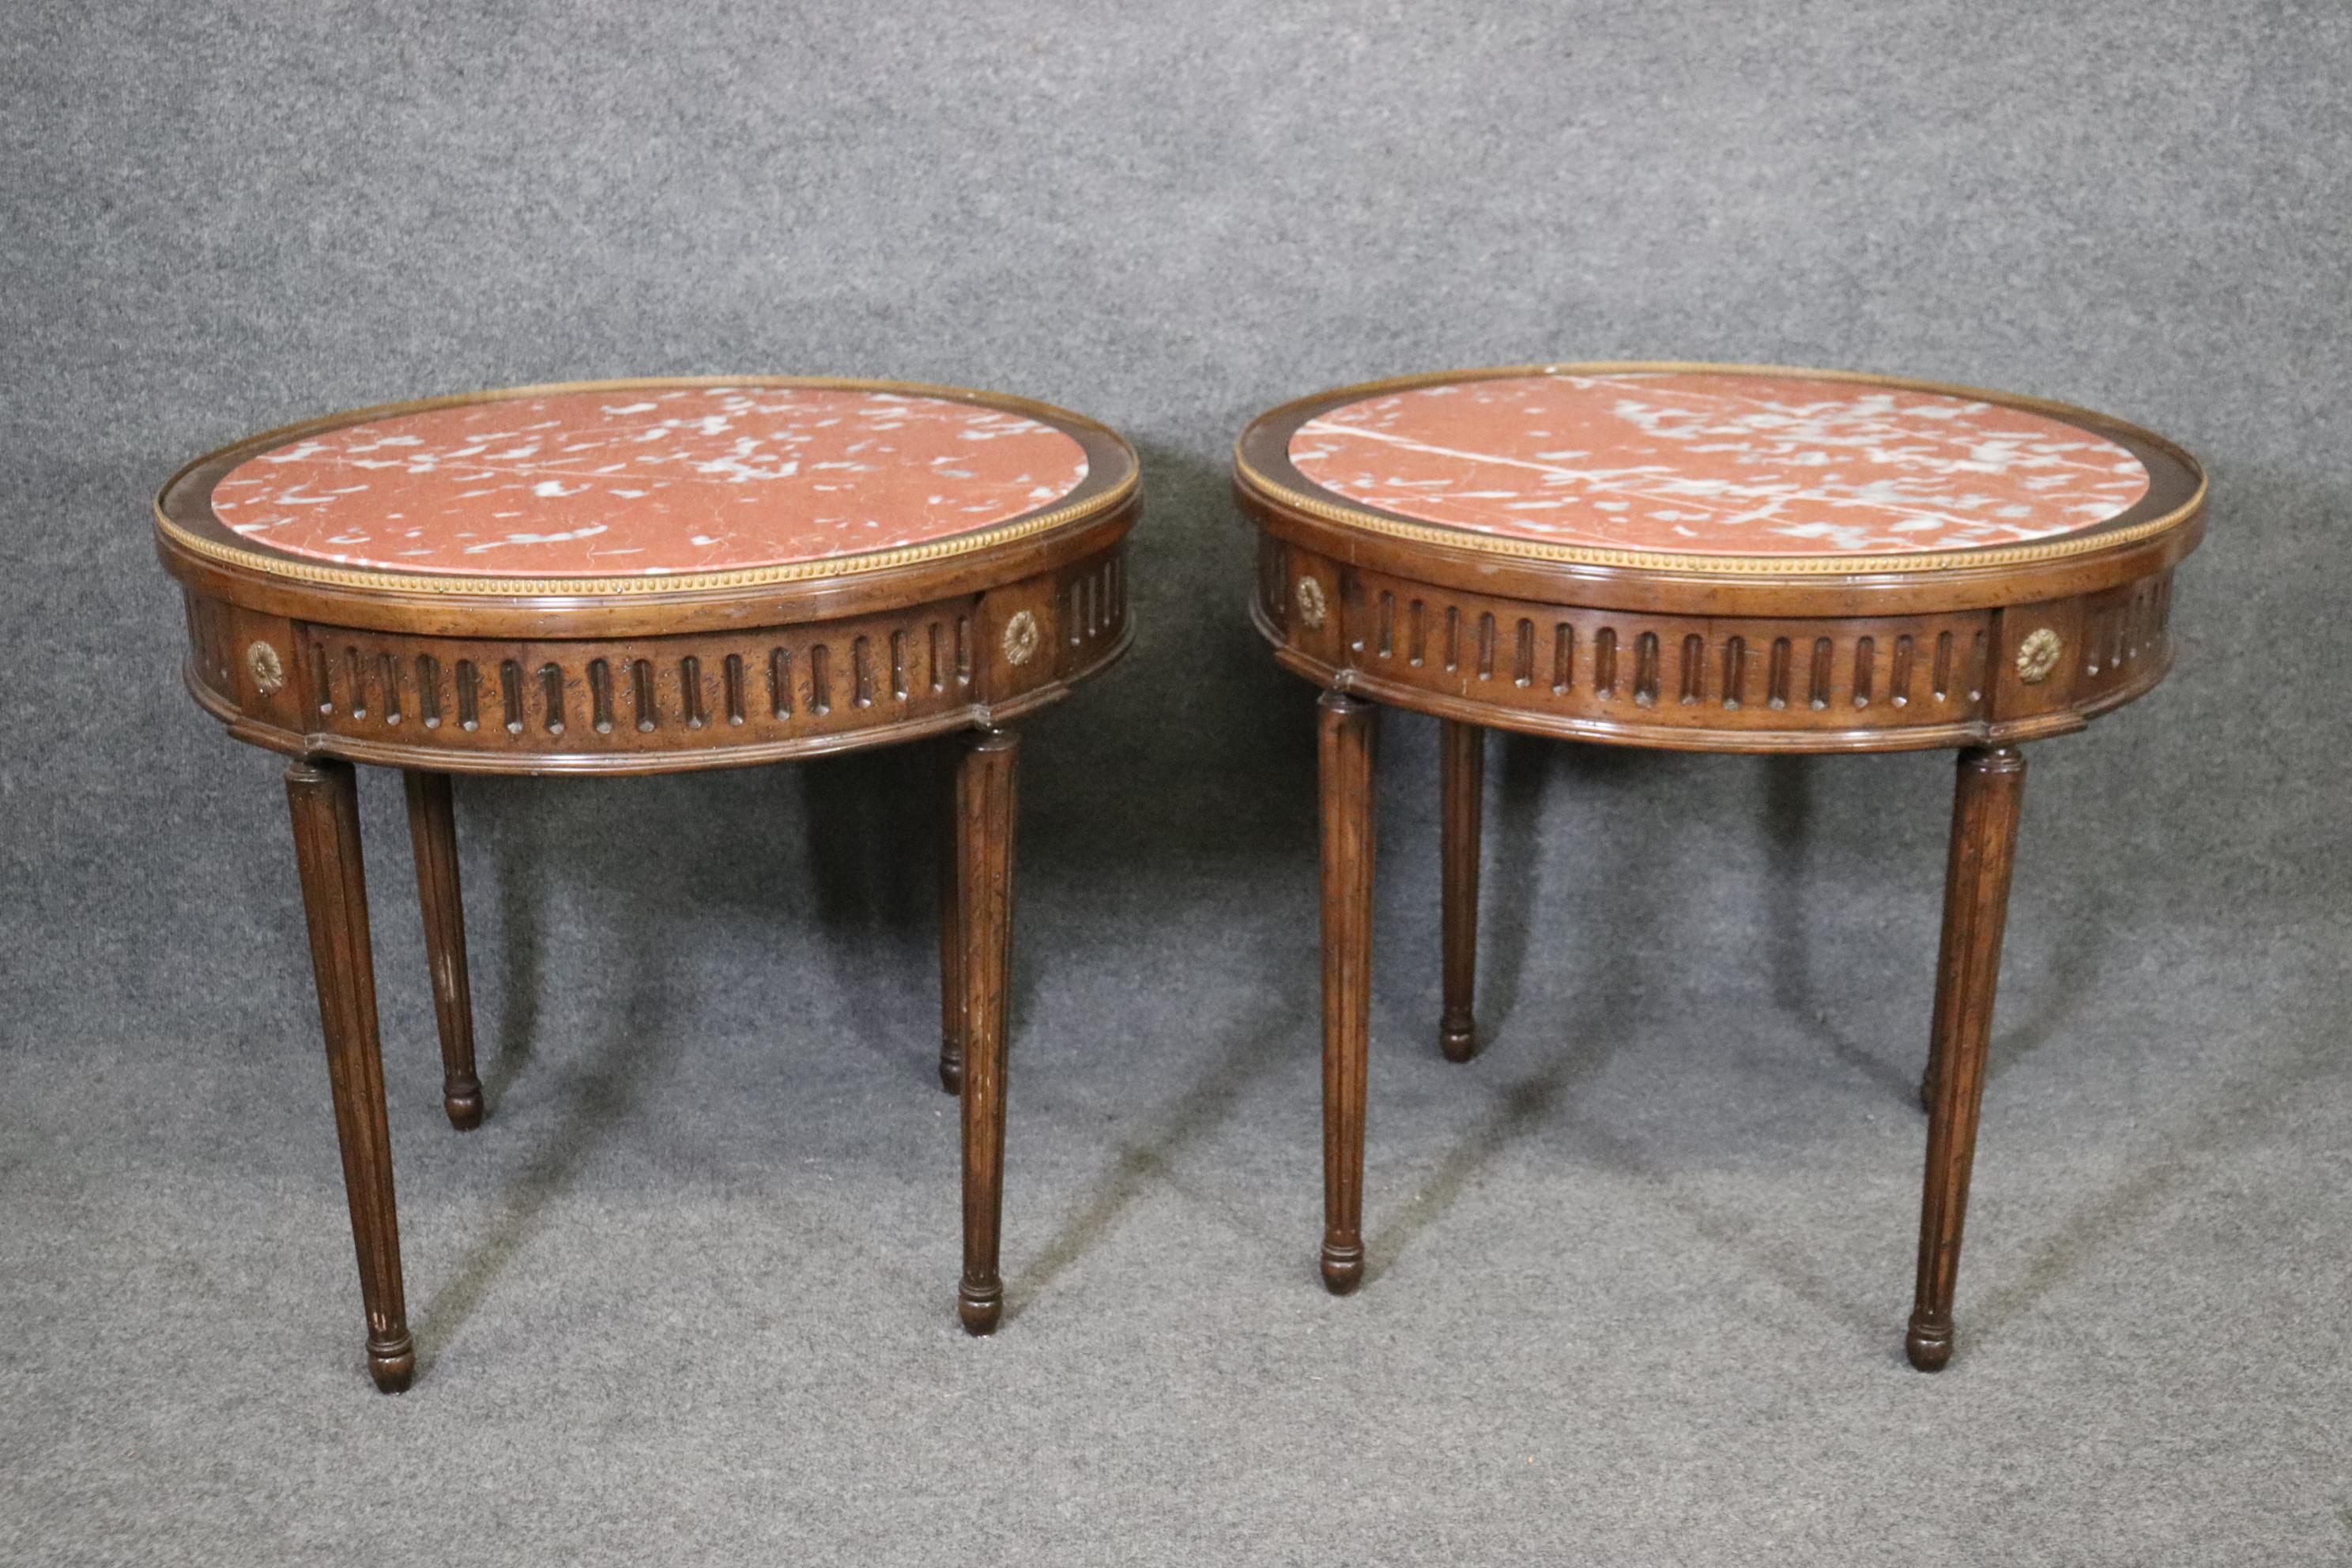 Fantastic Pair of French Marble Top Bouillotte Tables with Brass Trim circa 1940 For Sale 2